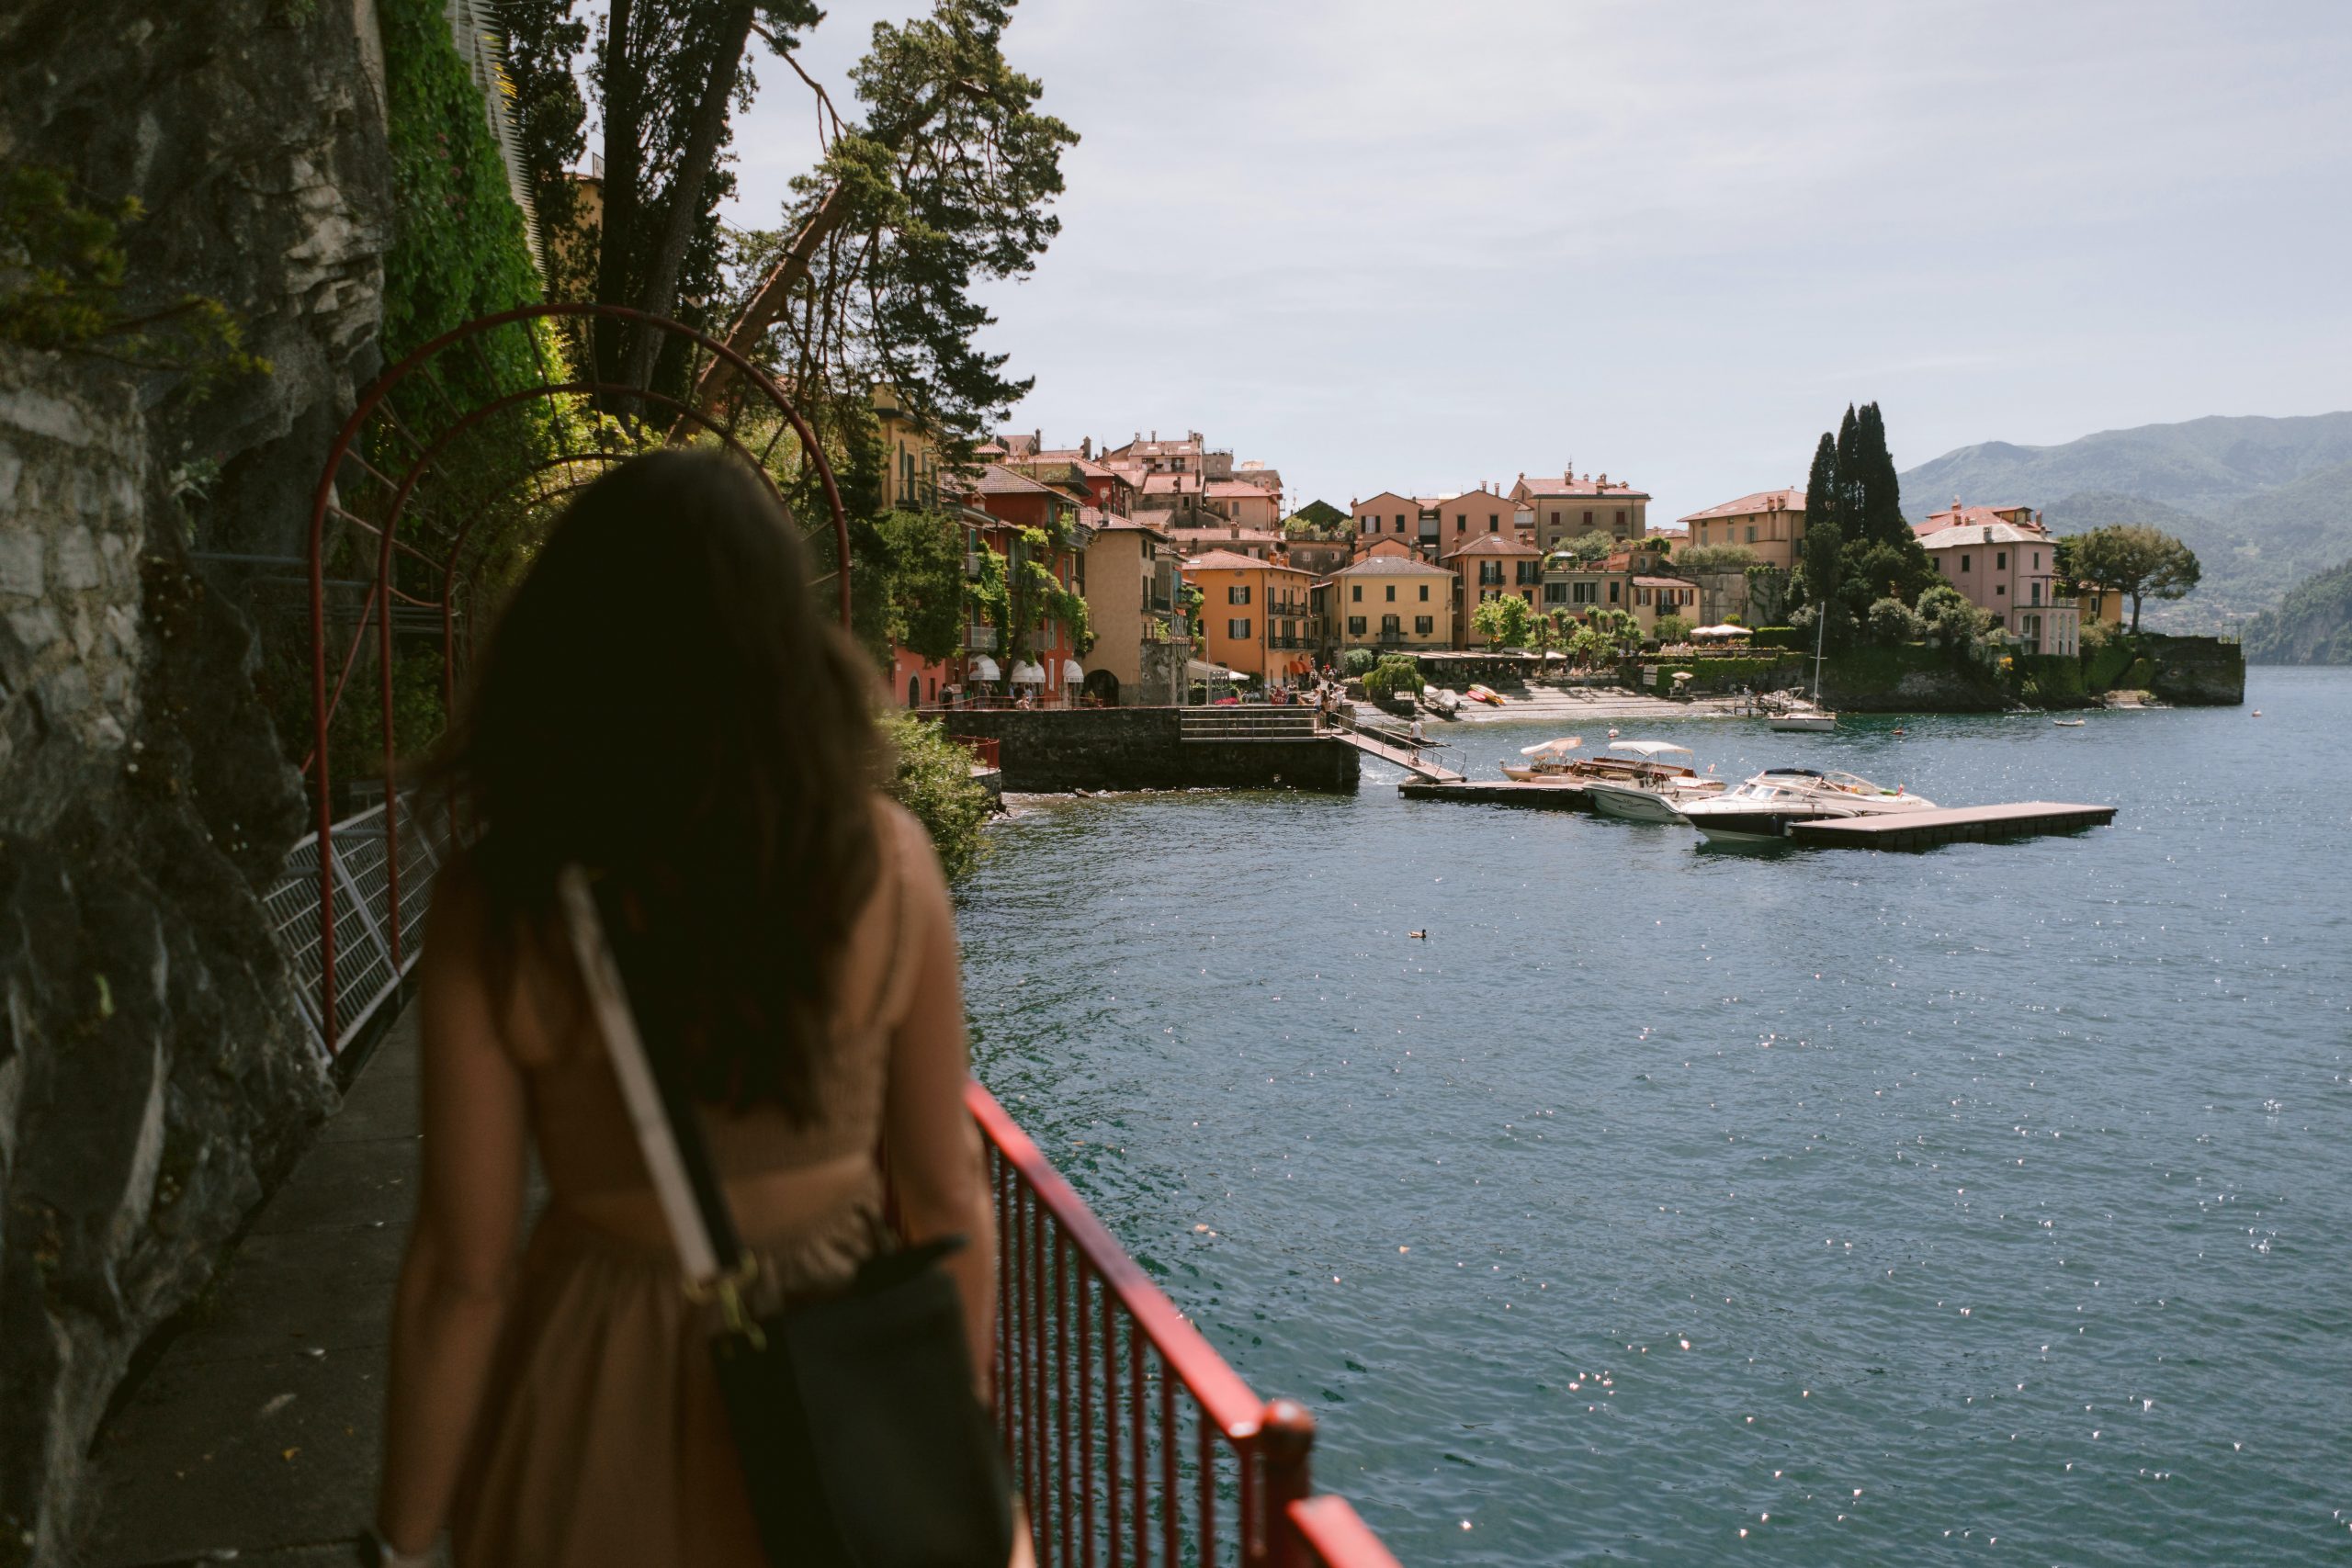 A women in a brown strapless dress walking on a lakeside walkway with views of an Italian town ahead.